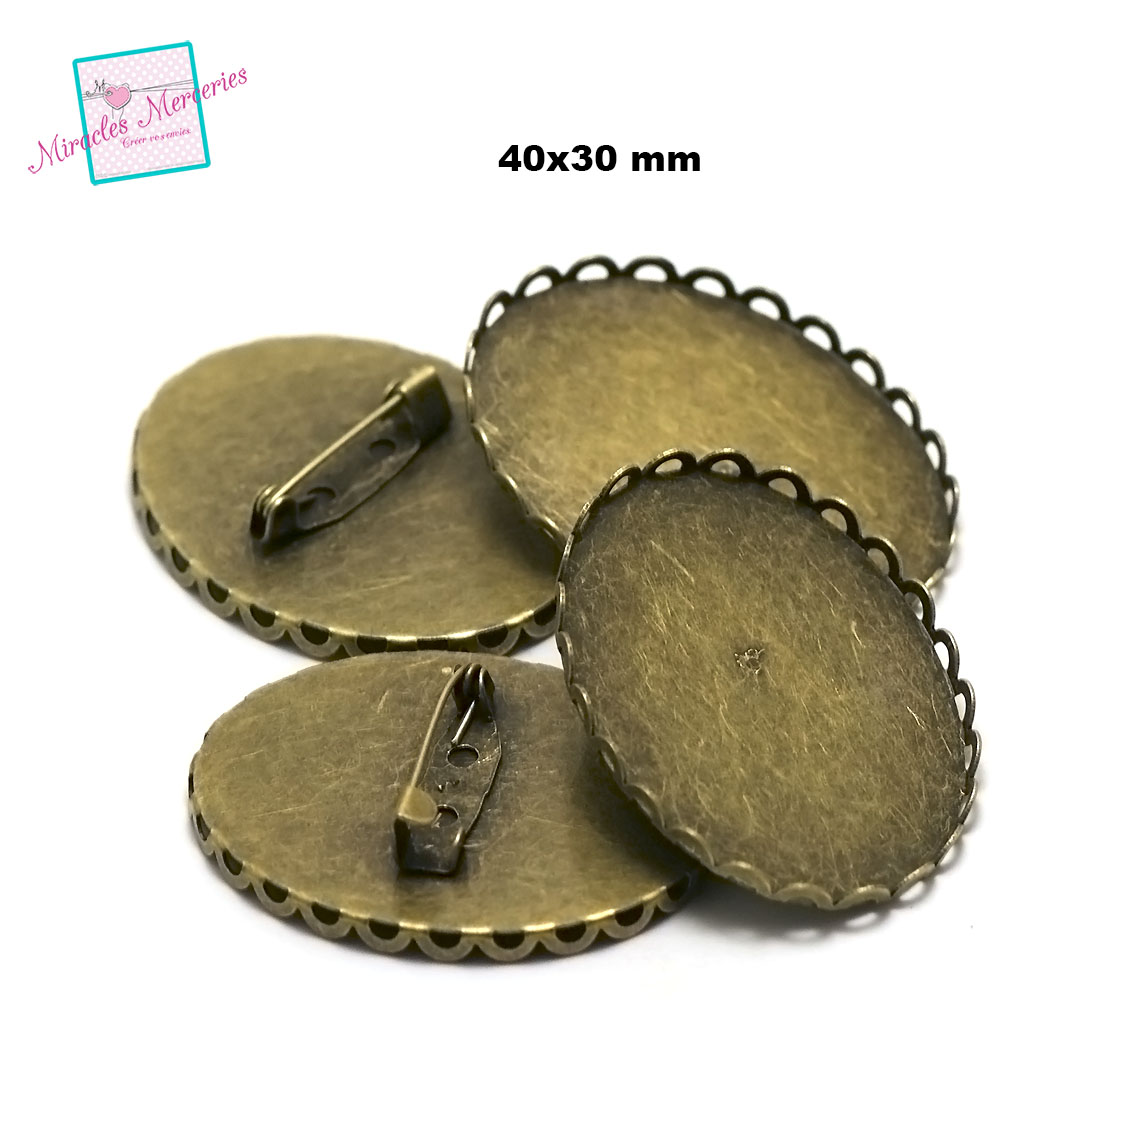 2 broches supports cabochon  ovale 40x30 mm , bronze dentelle